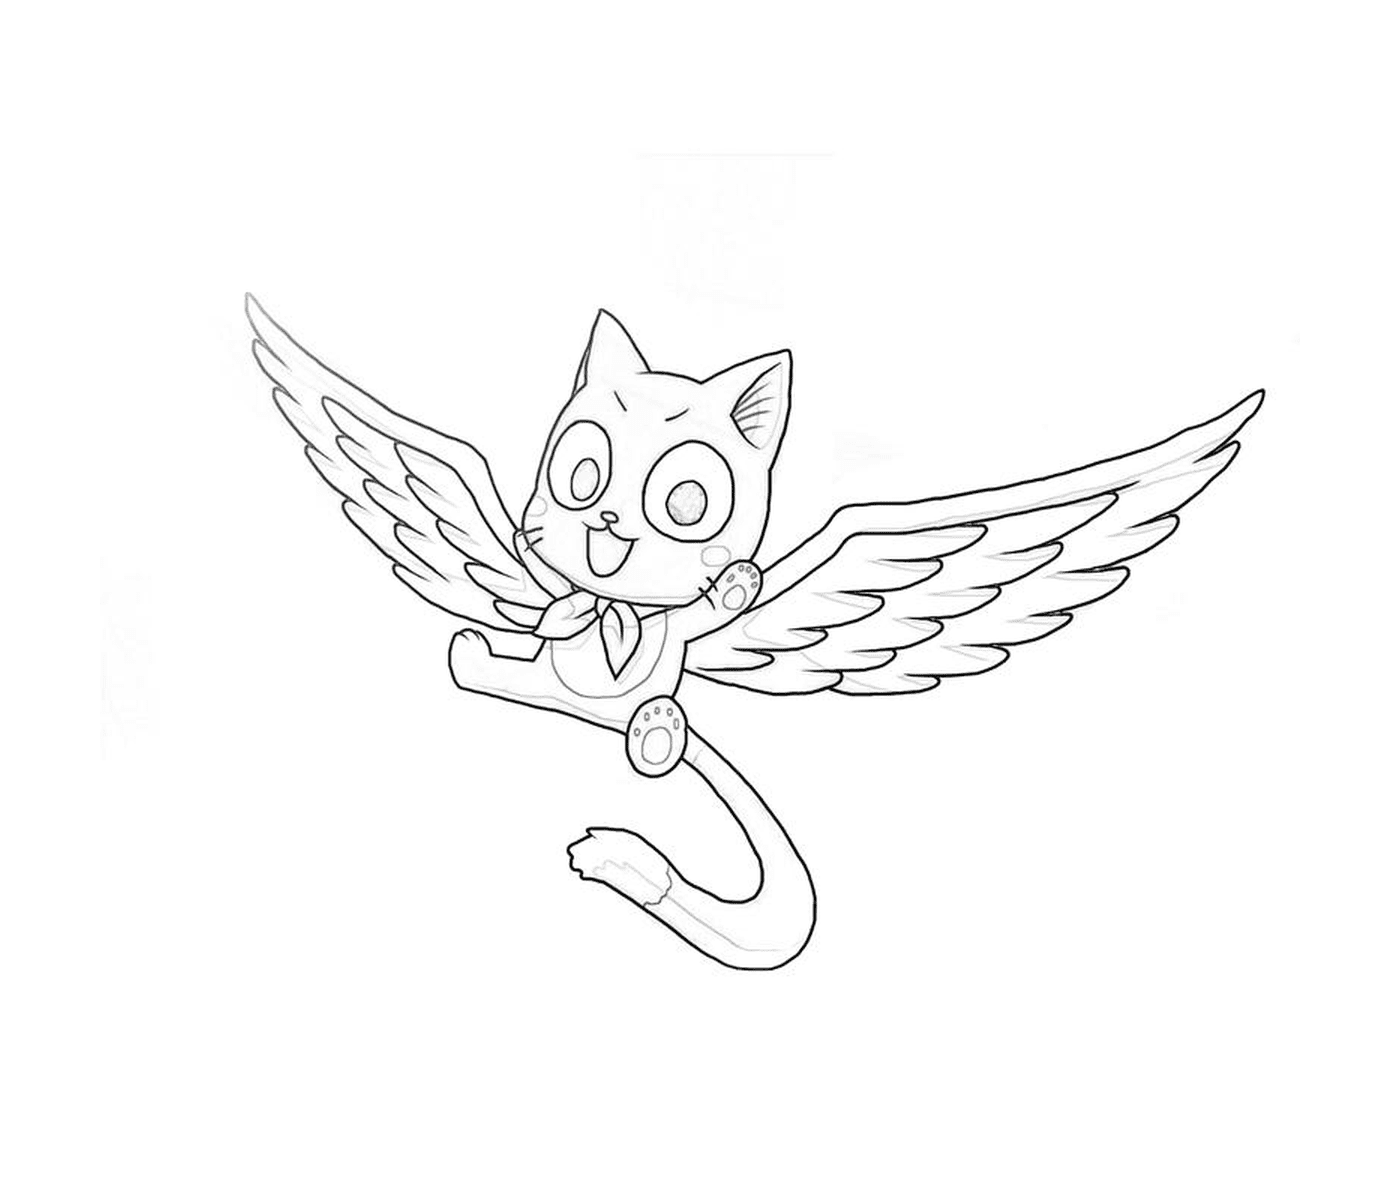  A flying cat with wings 